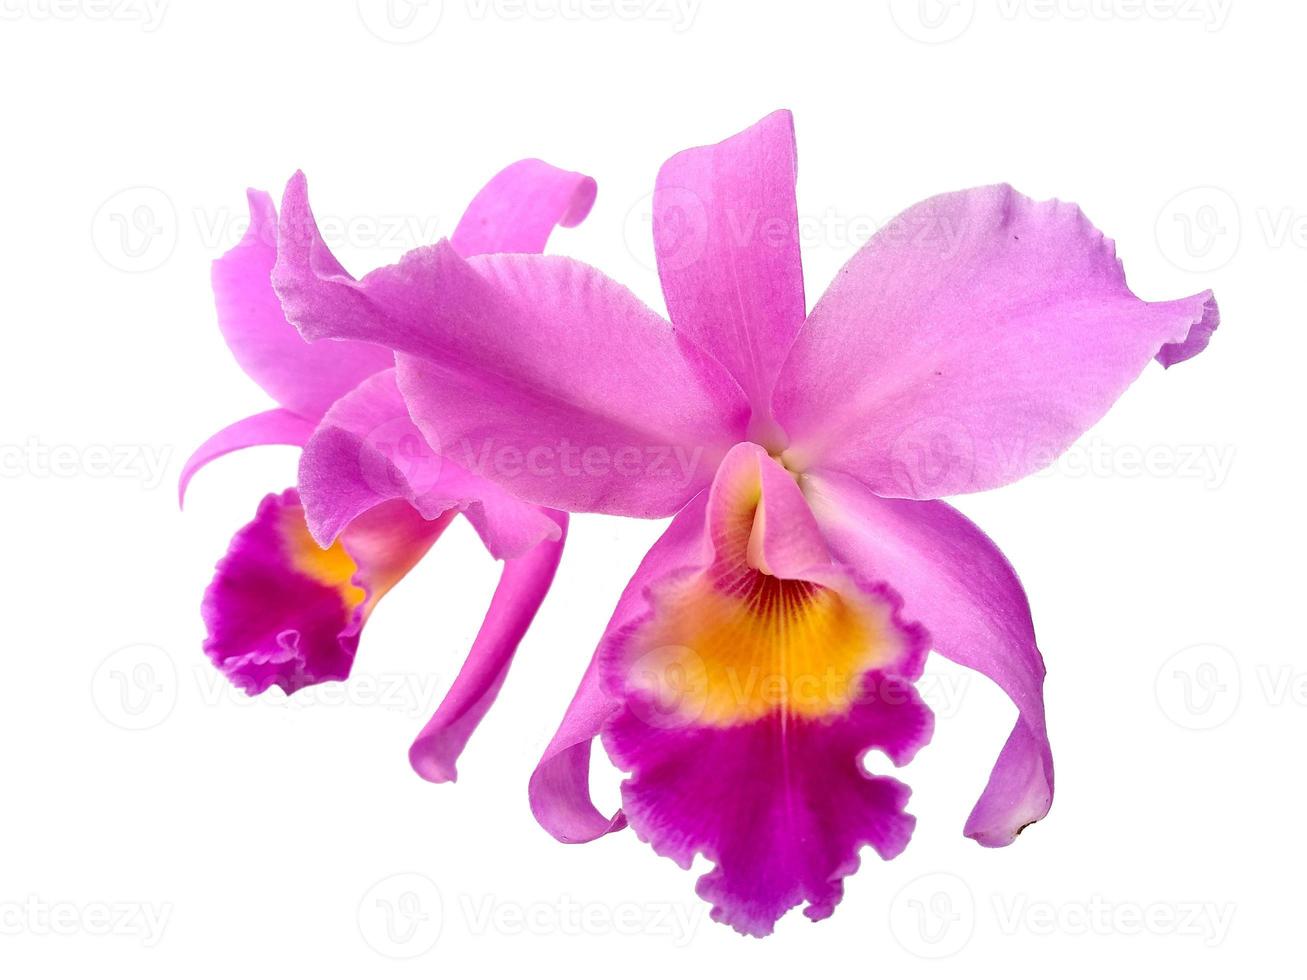 Beautiful purple Cattleya Orchid flowers isolated on white background photo